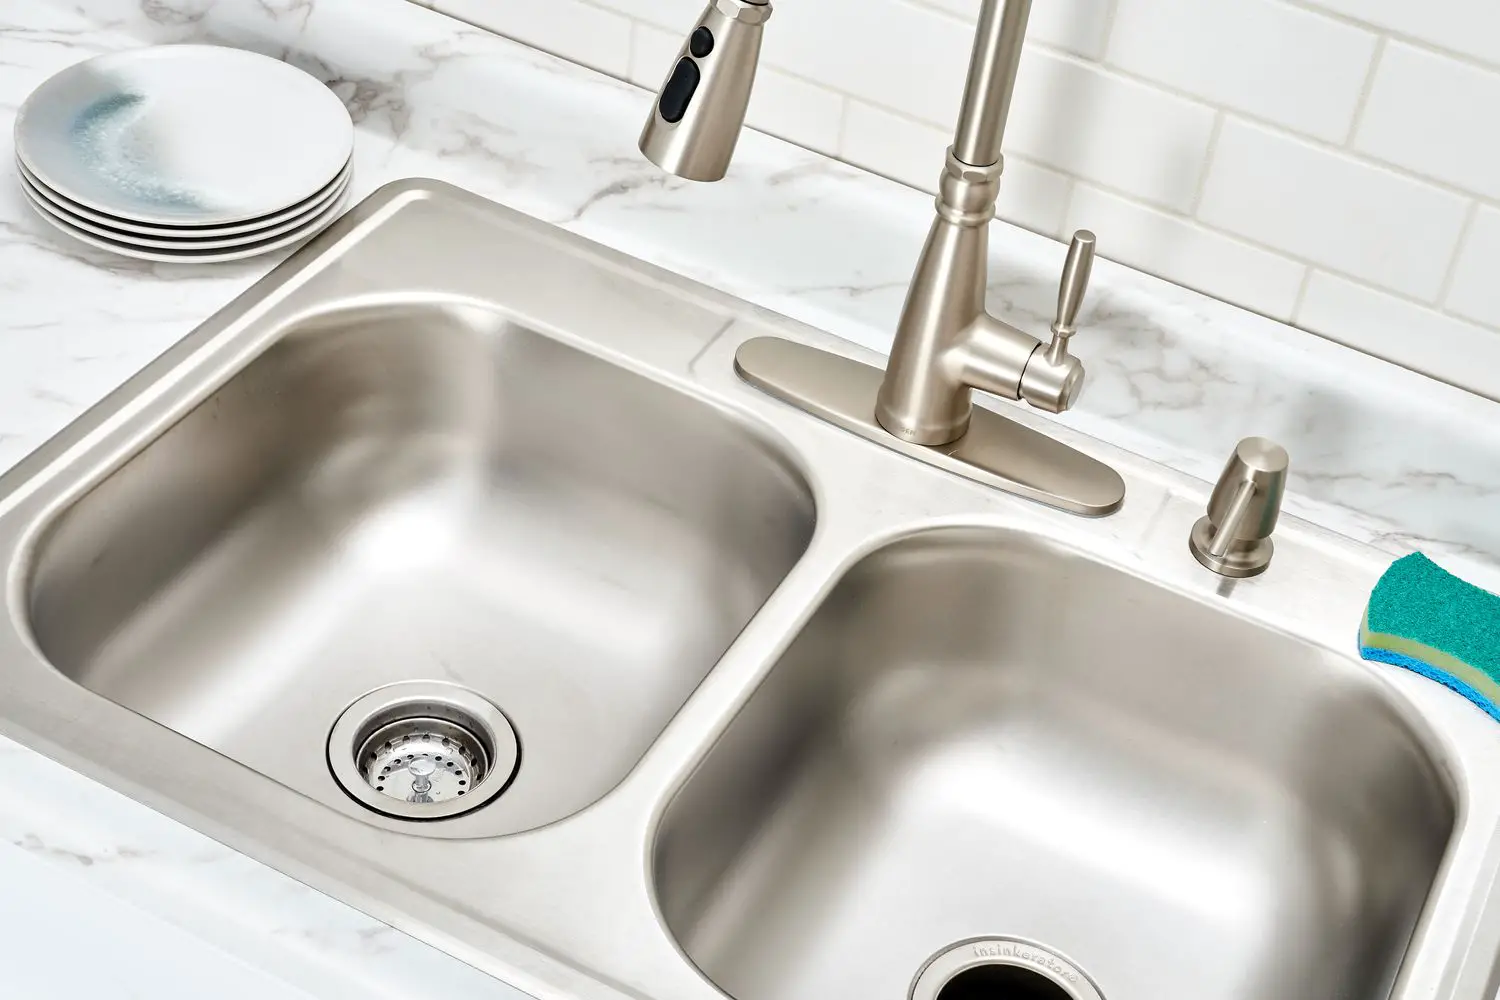 How to easily install a double kitchen sink